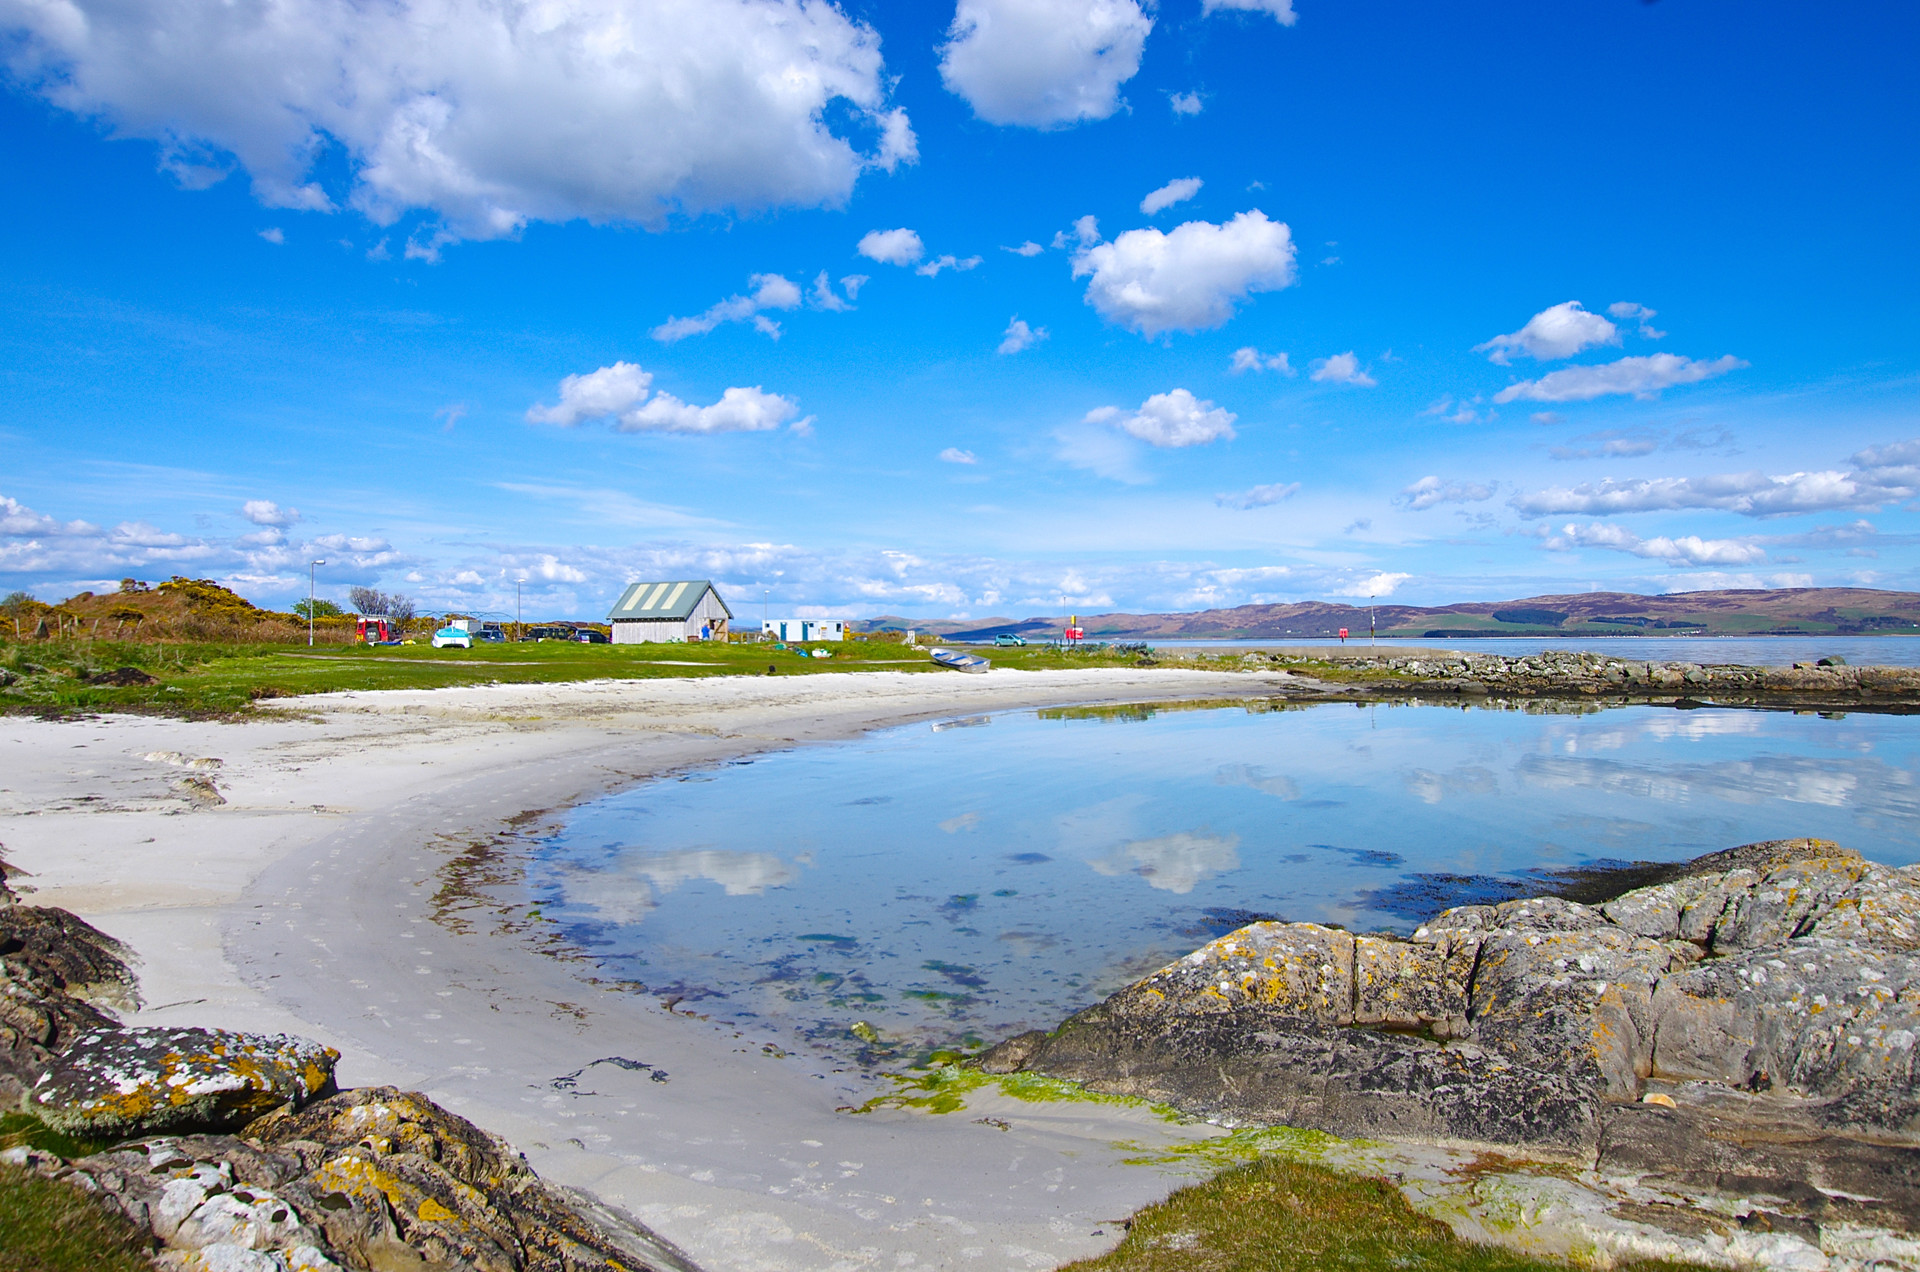 Background image - Gigha Activity Centre